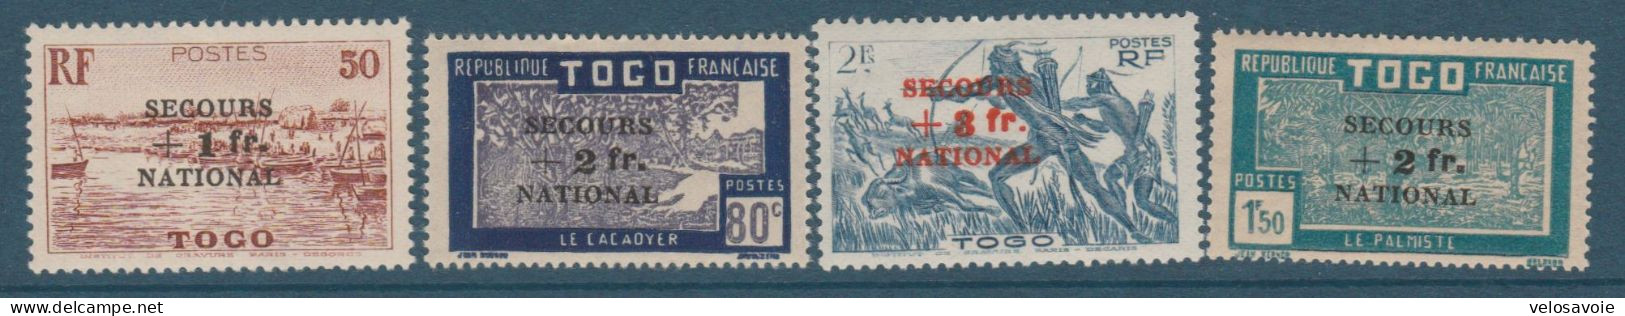 TOGO N° 211/214 SECOURS NATIONAL * - Unused Stamps